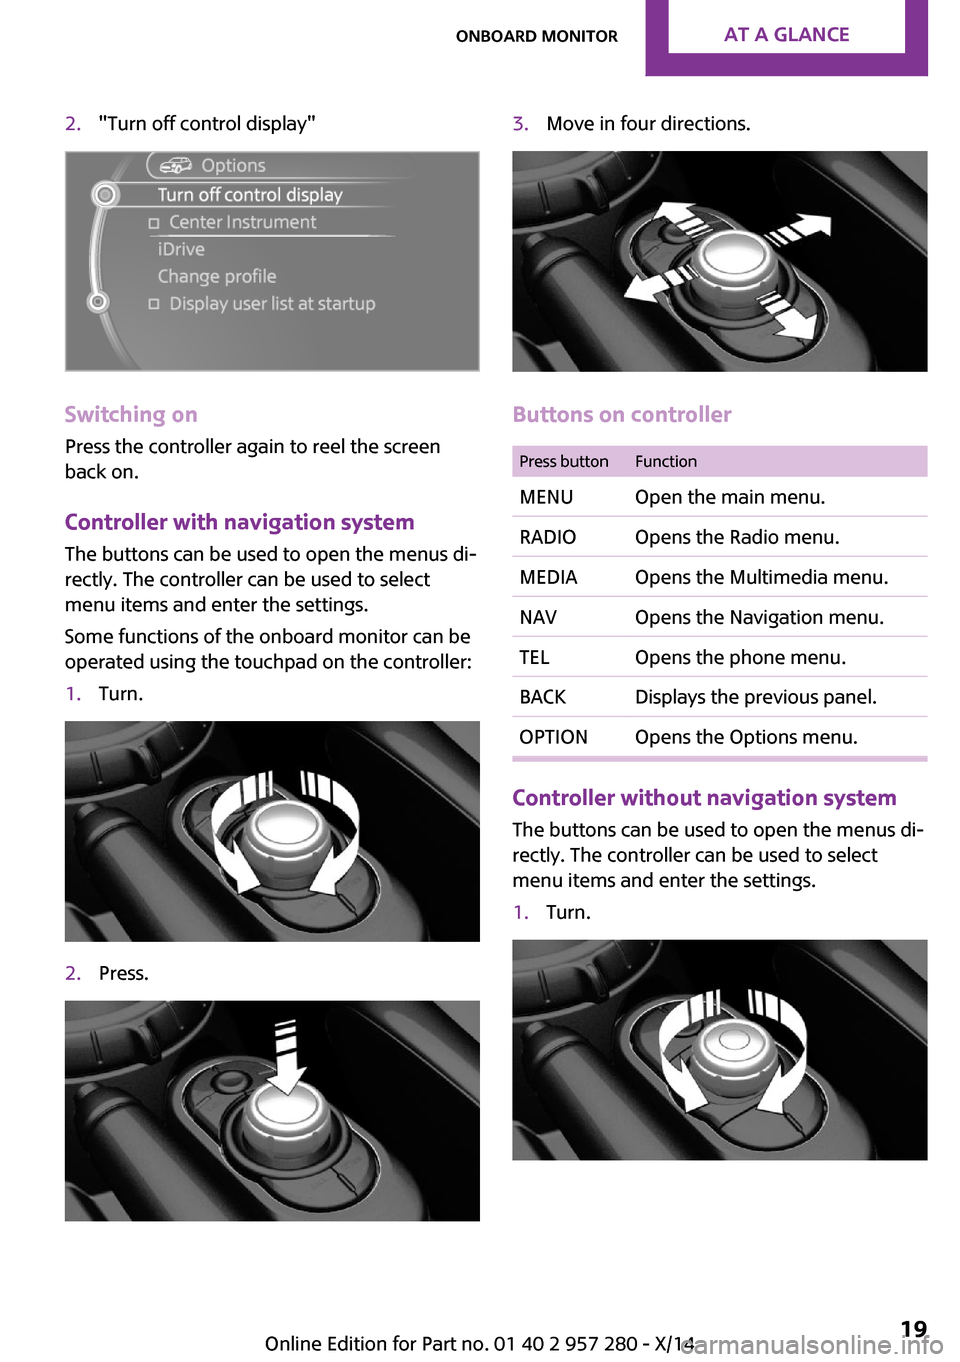 MINI 3 door 2014 Owners Guide 2."Turn off control display"
Switching on
Press the controller again to reel the screen
back on.
Controller with navigation system
The buttons can be used to open the menus di‐
rectly. The controlle